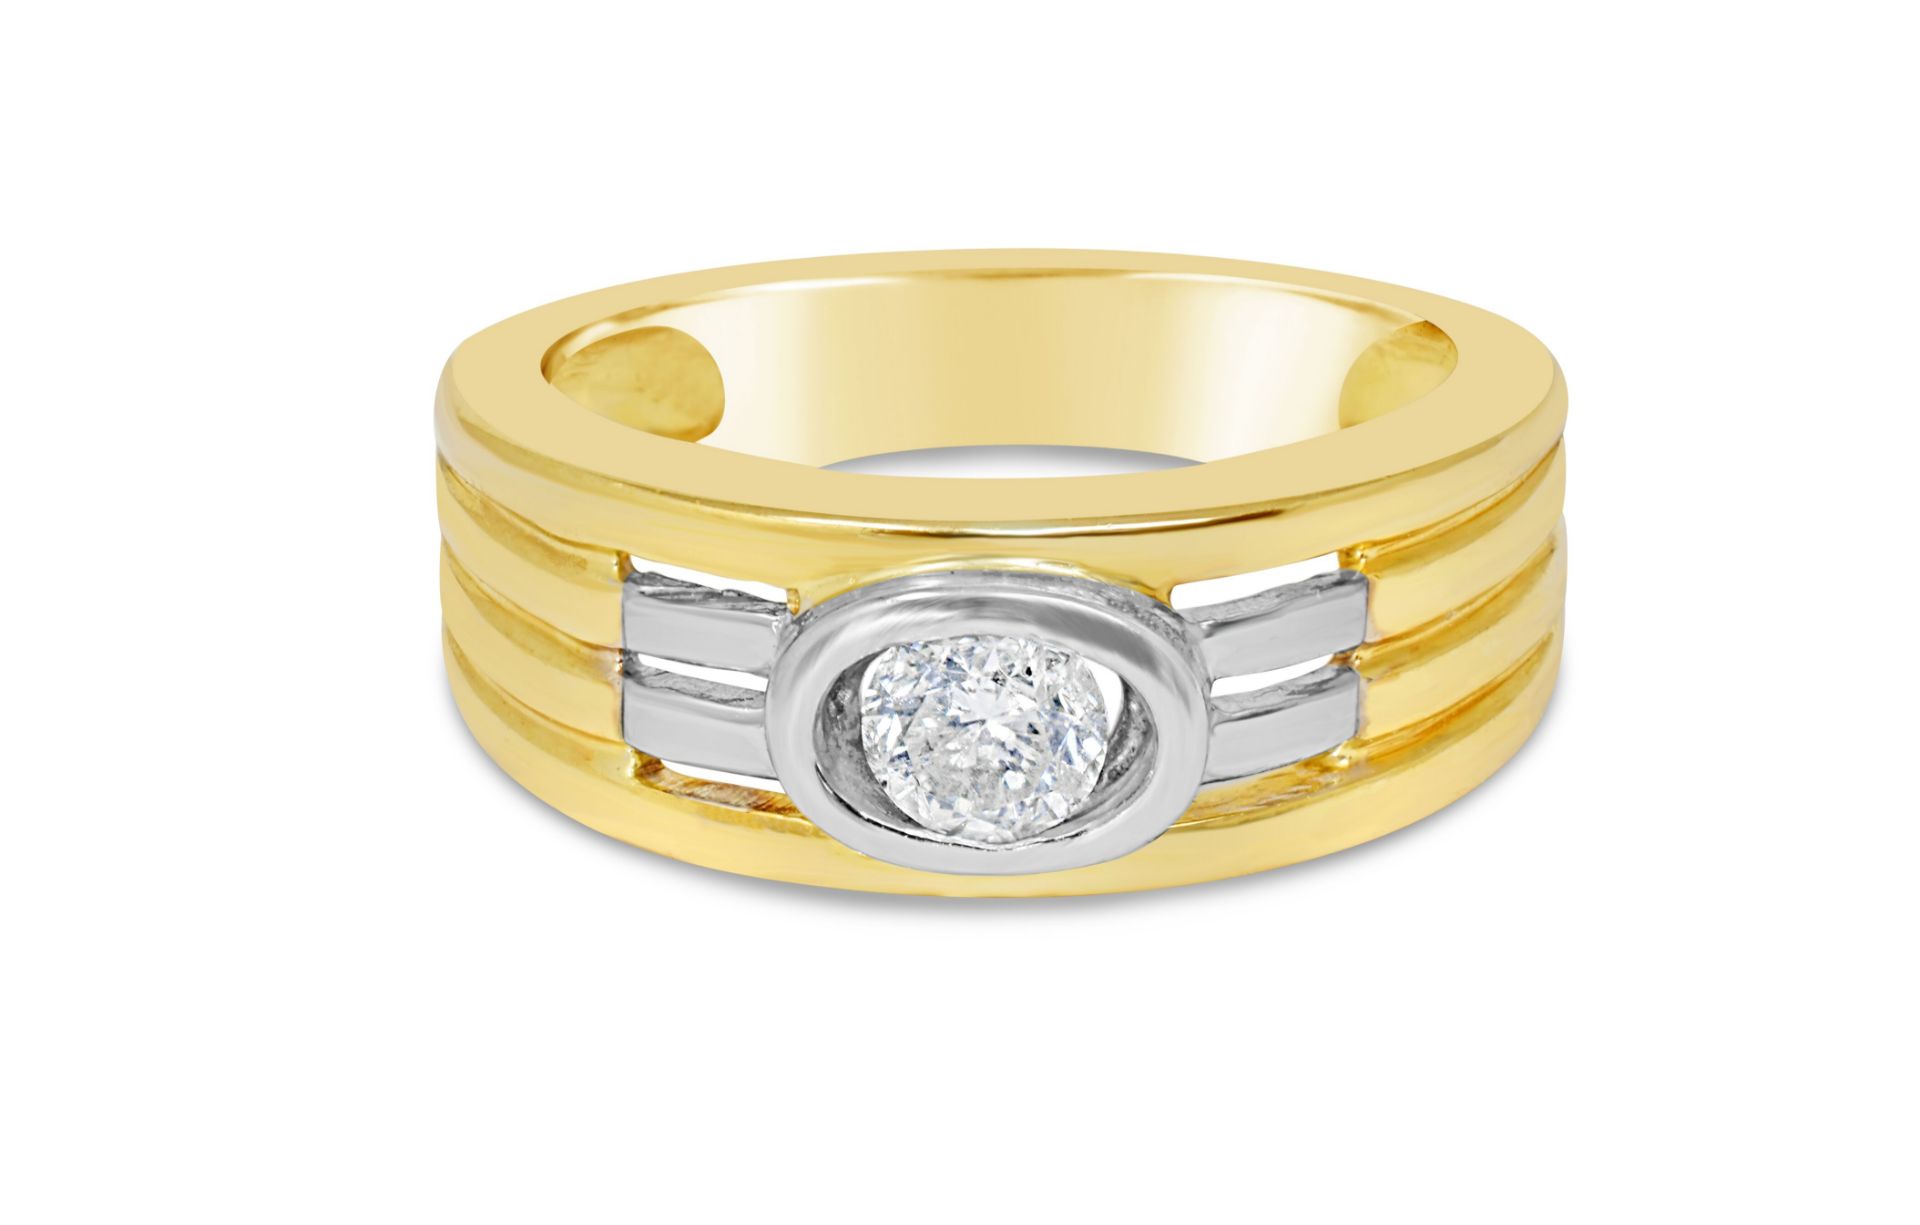 Wide Band Diamond Ring, 9ct Yellow Gold, RRP £2,299 Weight 5.38g, Diamond Weight 0.34ct, Colour H, - Image 2 of 3